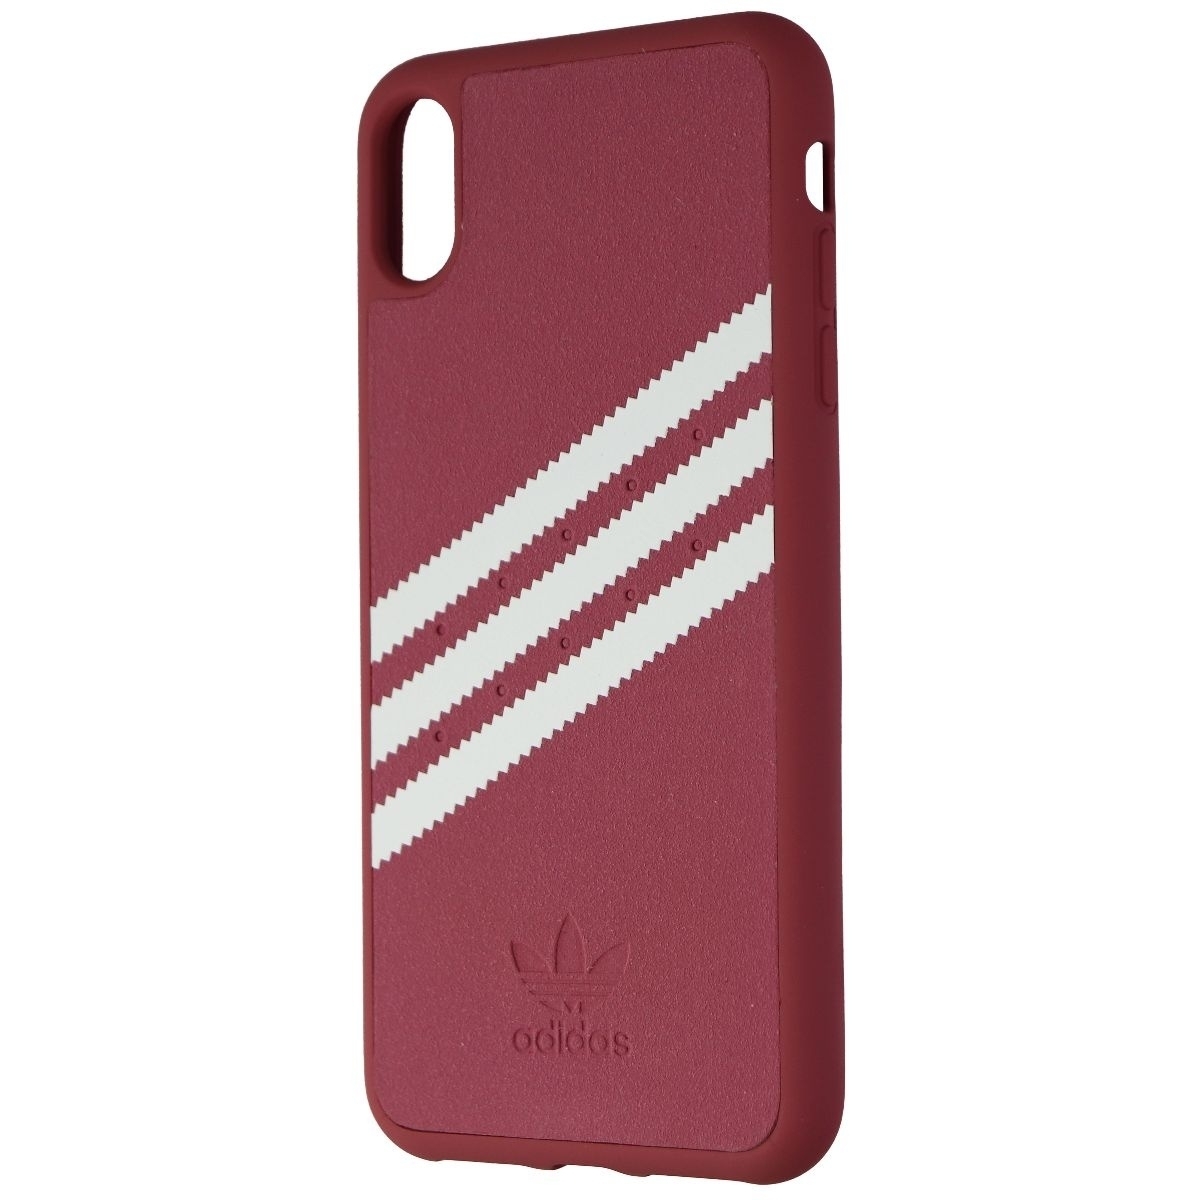 Adidas 3-Stripes Snap Case For Apple IPhone Xs Max - Pink/White